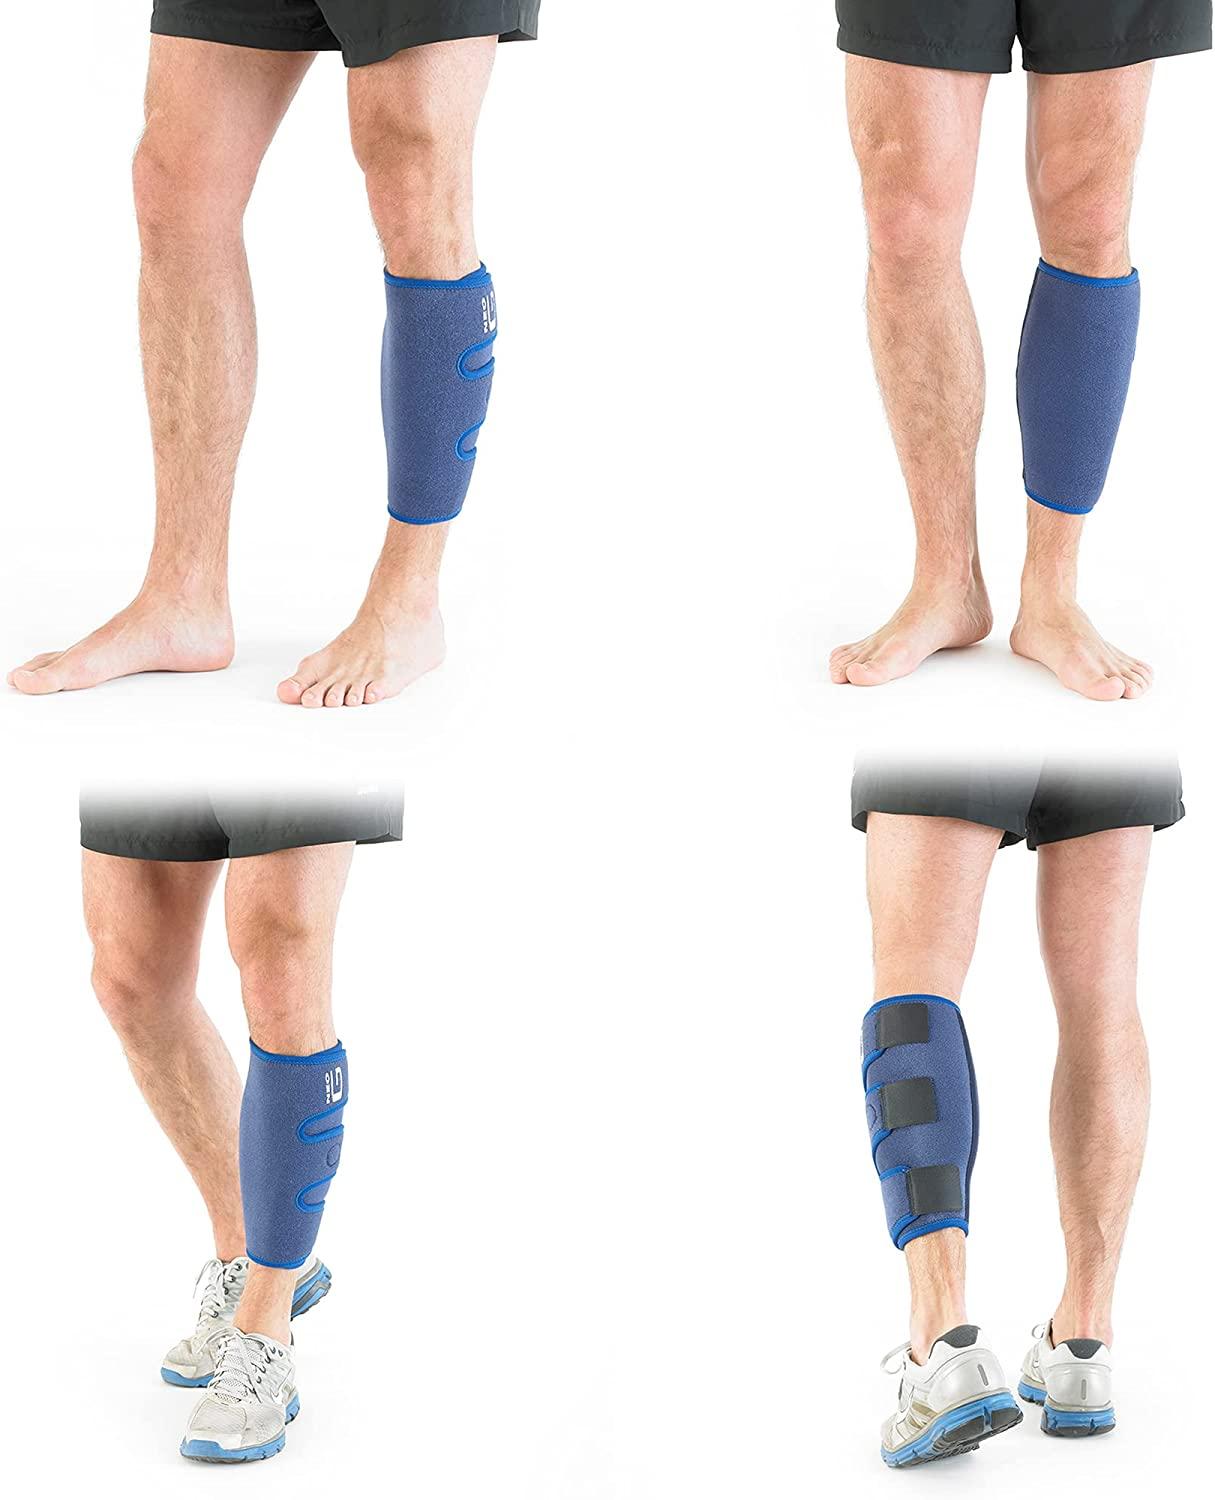 Calf Brace Leg Compression Sleeve for Torn Calf Muscle,Adjustable Calf  Support Wrap Bandage for Calf Strain,Swelling,Cramps,Varicose Vein,fit Men  